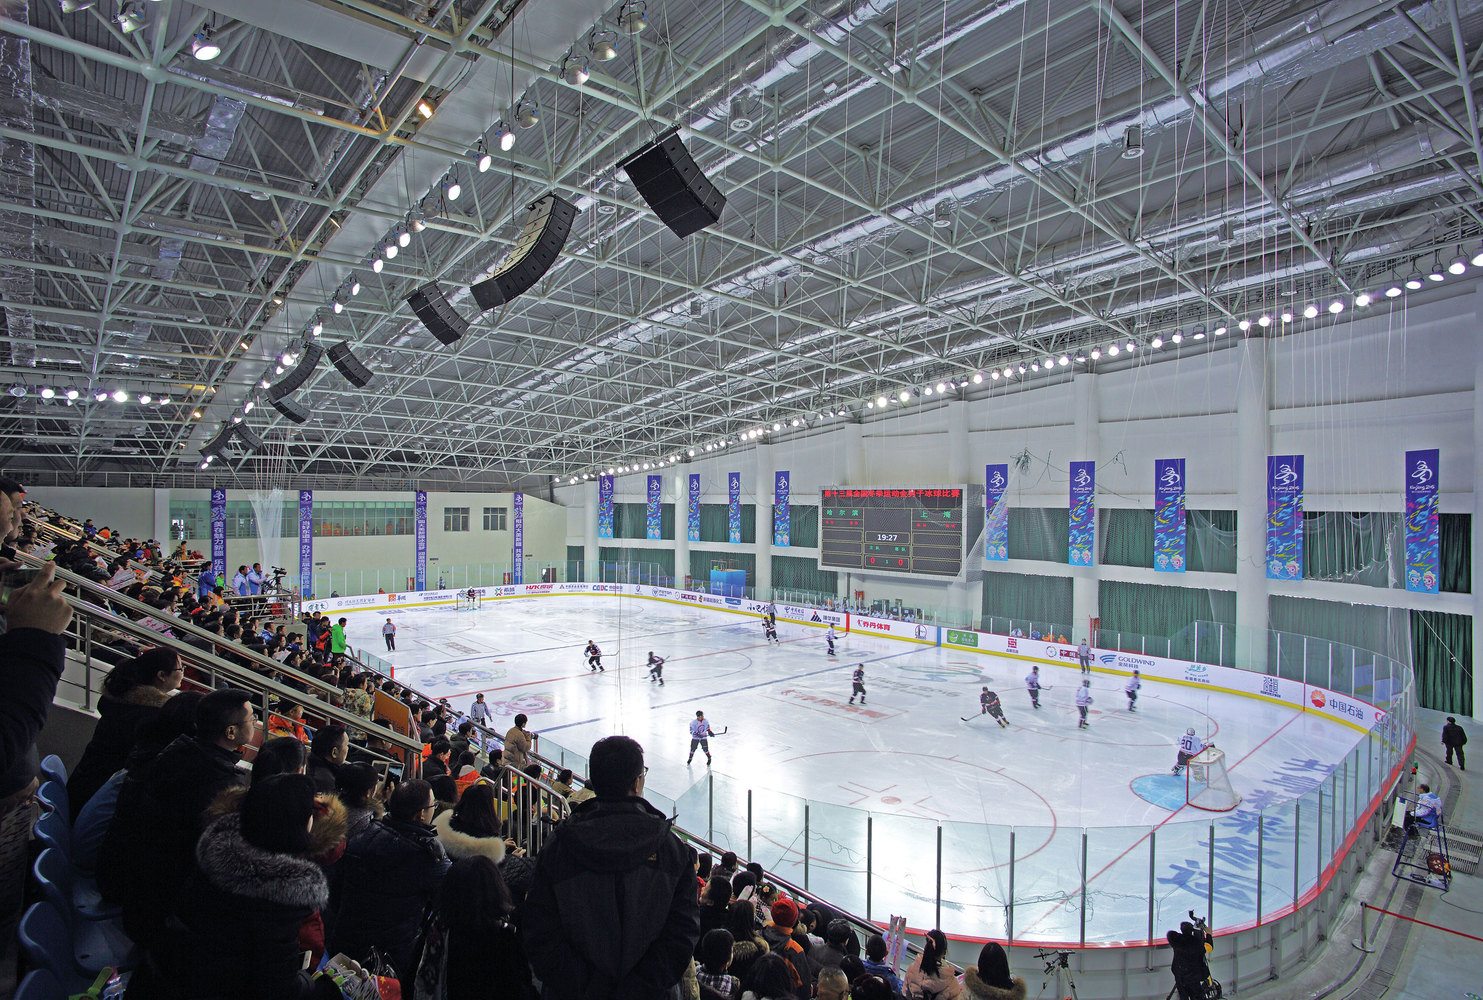 ice-sports-center-of-the-national-winter-games-12-interior-of-hocky-place.jpg